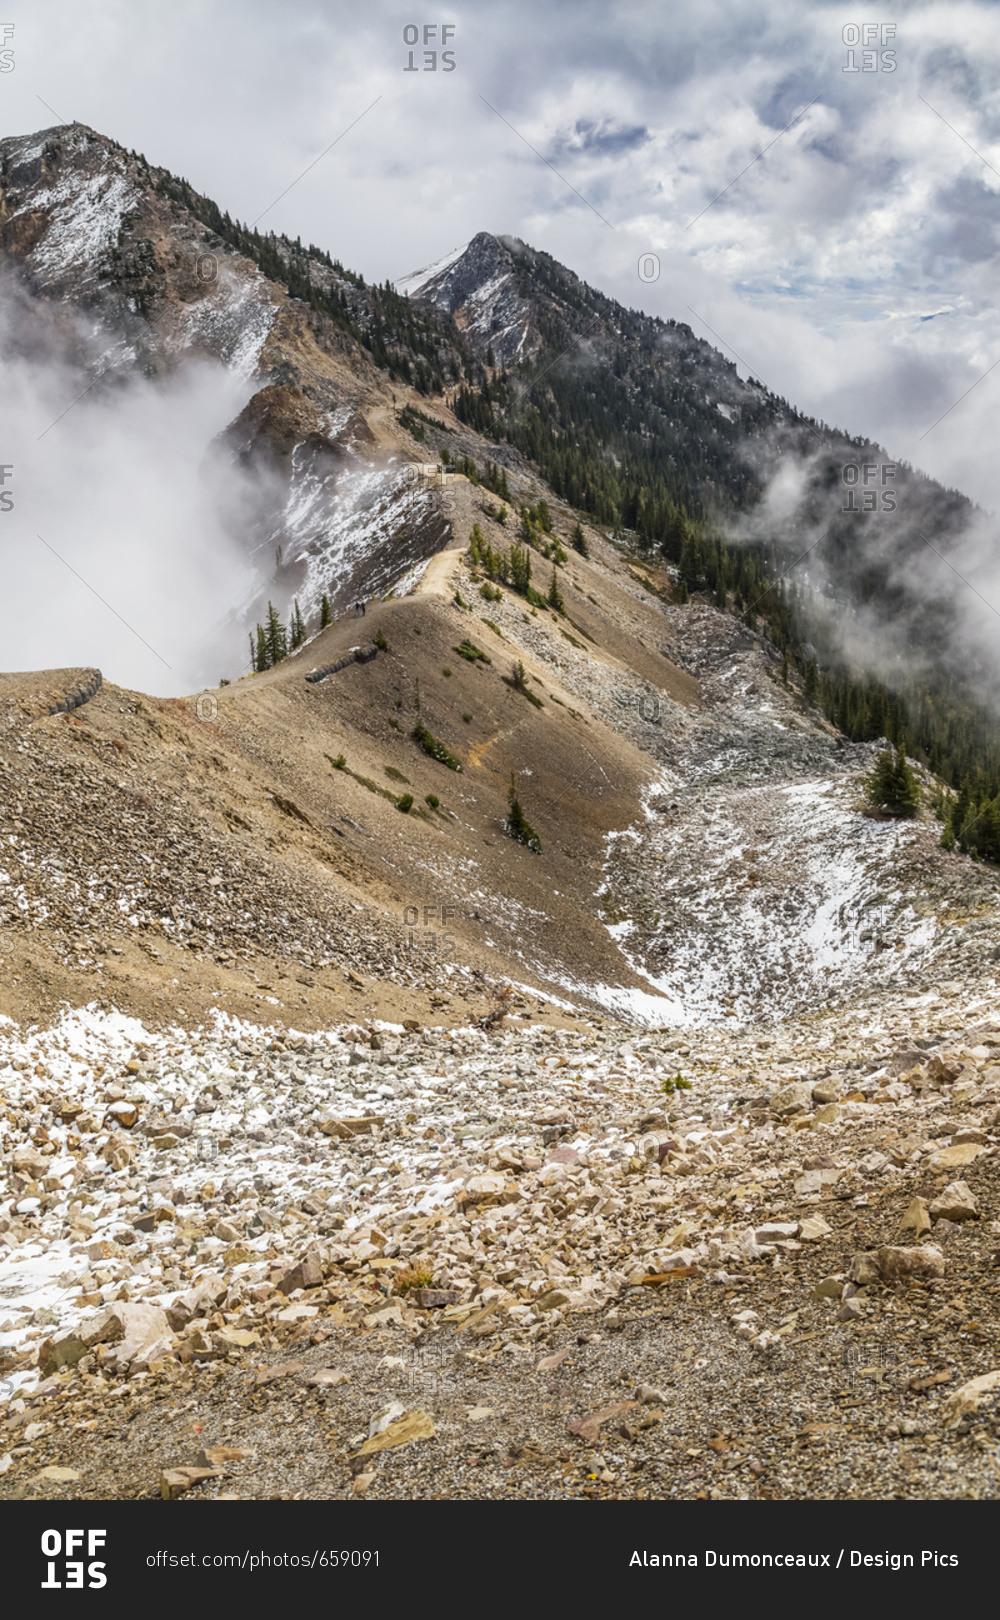 The Rugged Hiking And Mountain Bike Trails At The Top Of Kicking Horse Mountain, Part Of The Rocky Mountains Just Beyond The Alberta Border; Golden, British Columbia, Canada